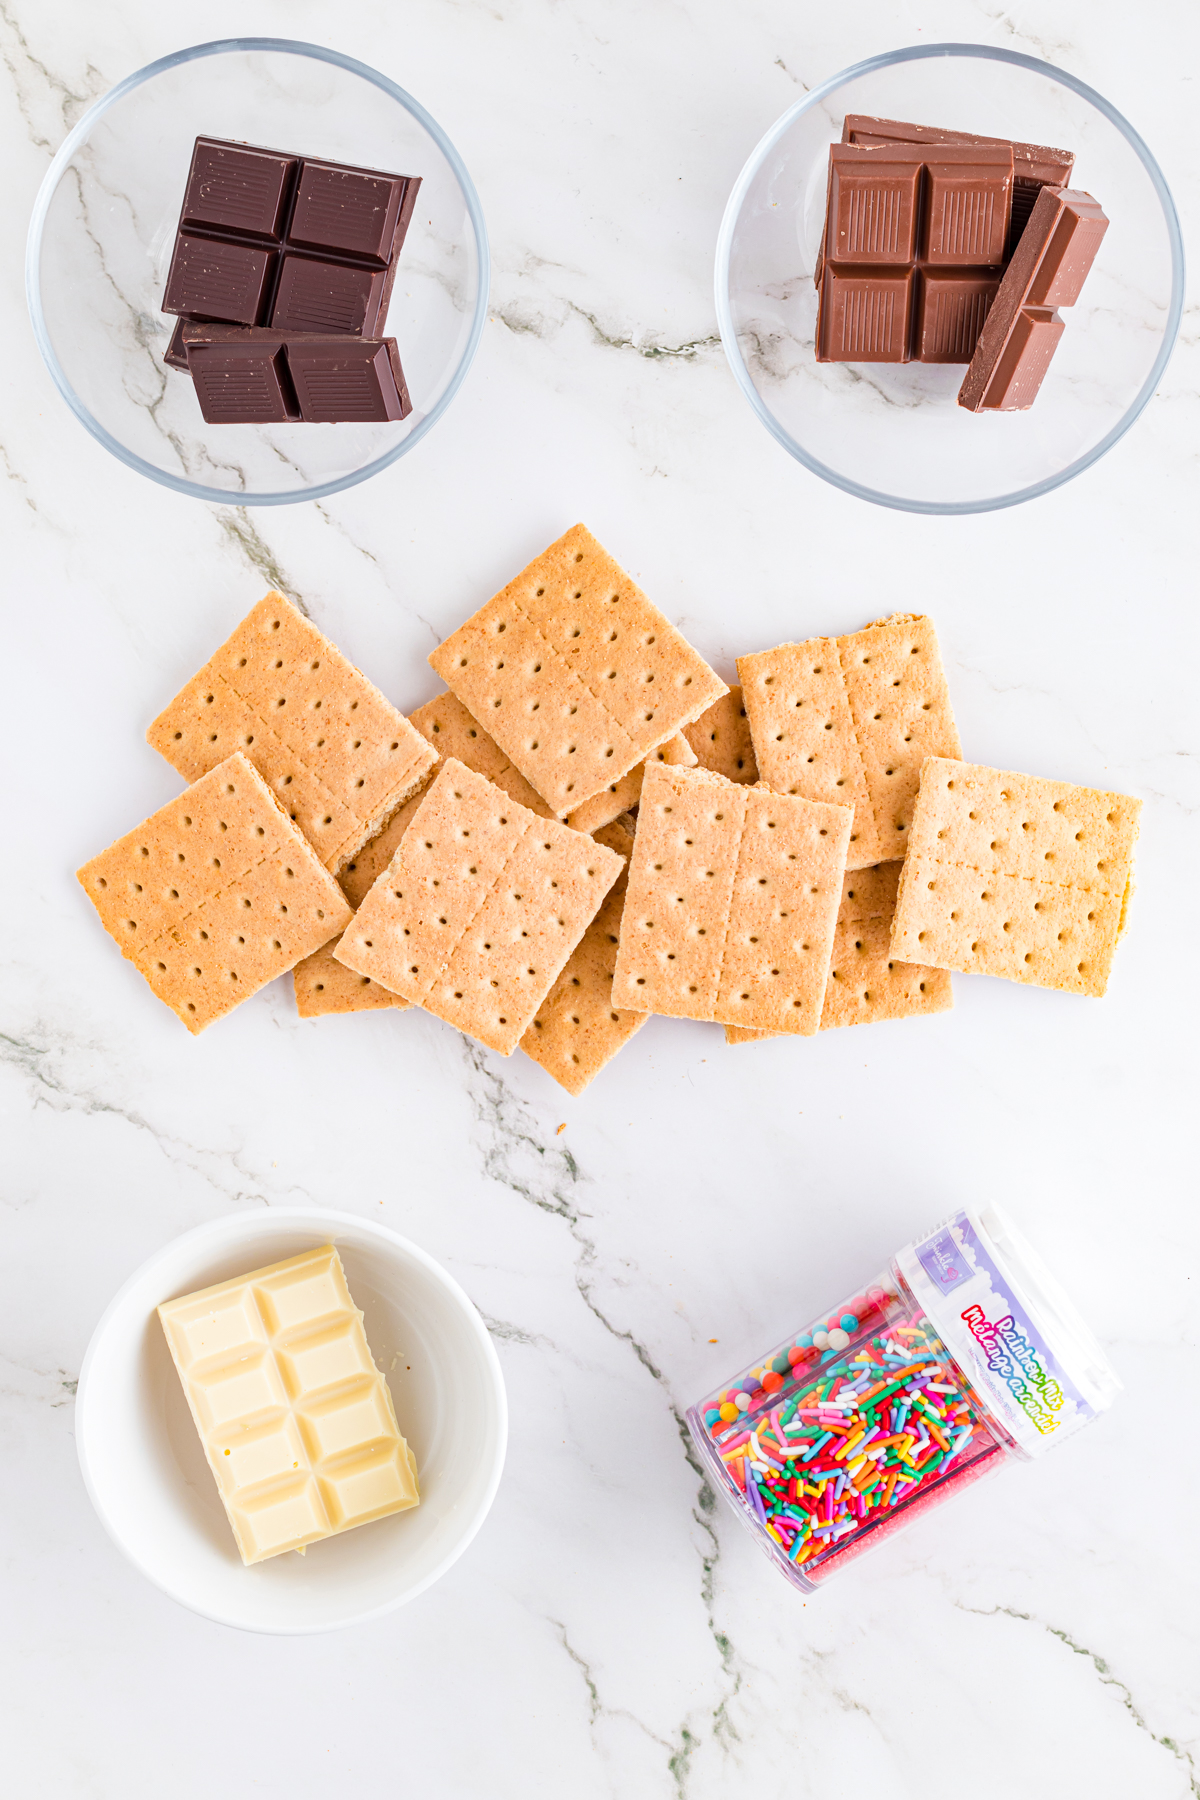 Ingredients for chocolate dipped graham crackers.